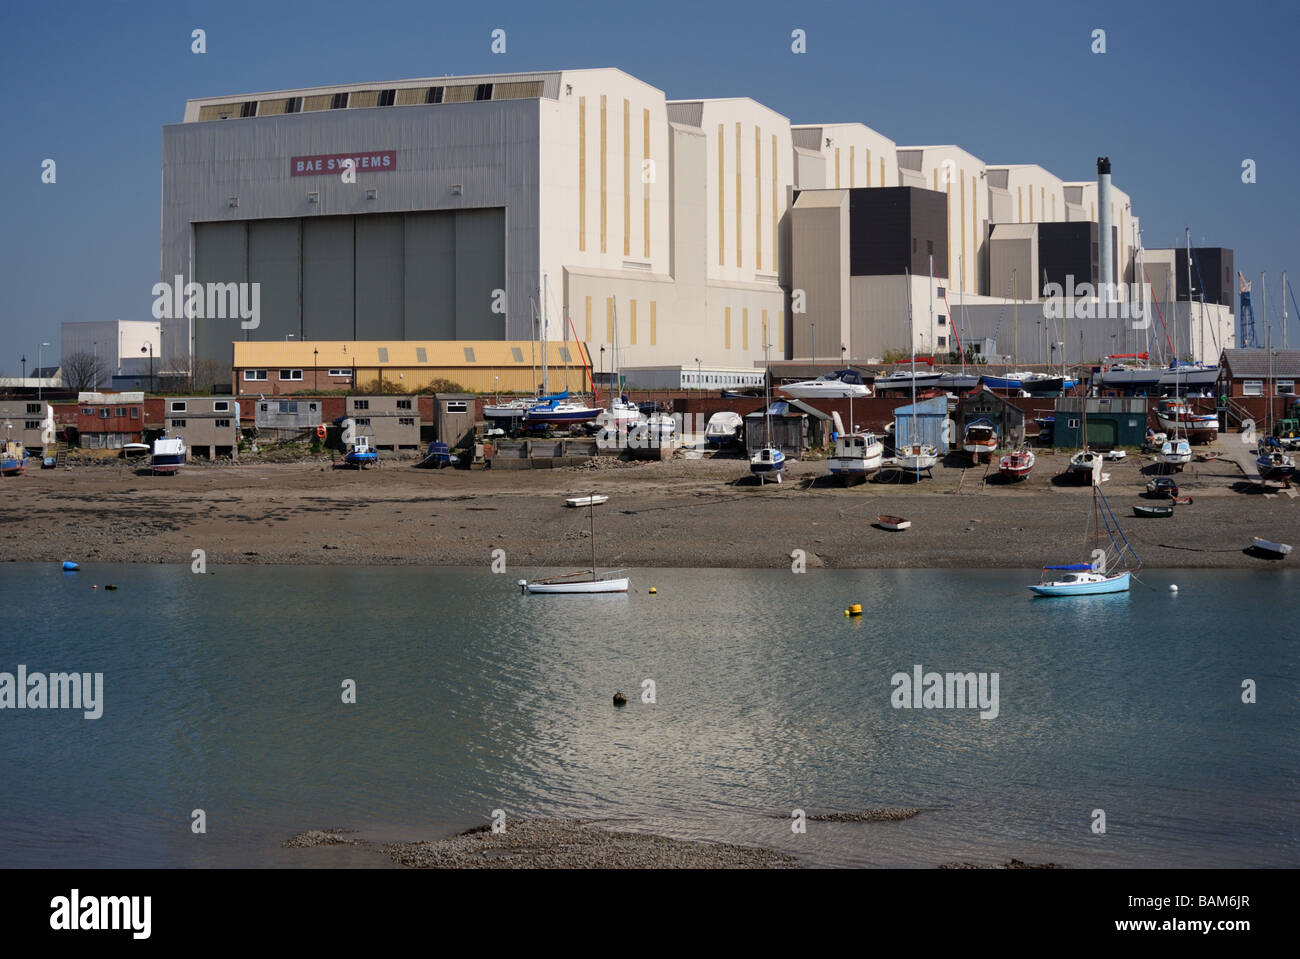 Walney Channel and BAE Systems Submarine Solutions buildings. Barrow-in-Furness, Cumbria, England, United Kingdom, Europe. Stock Photo